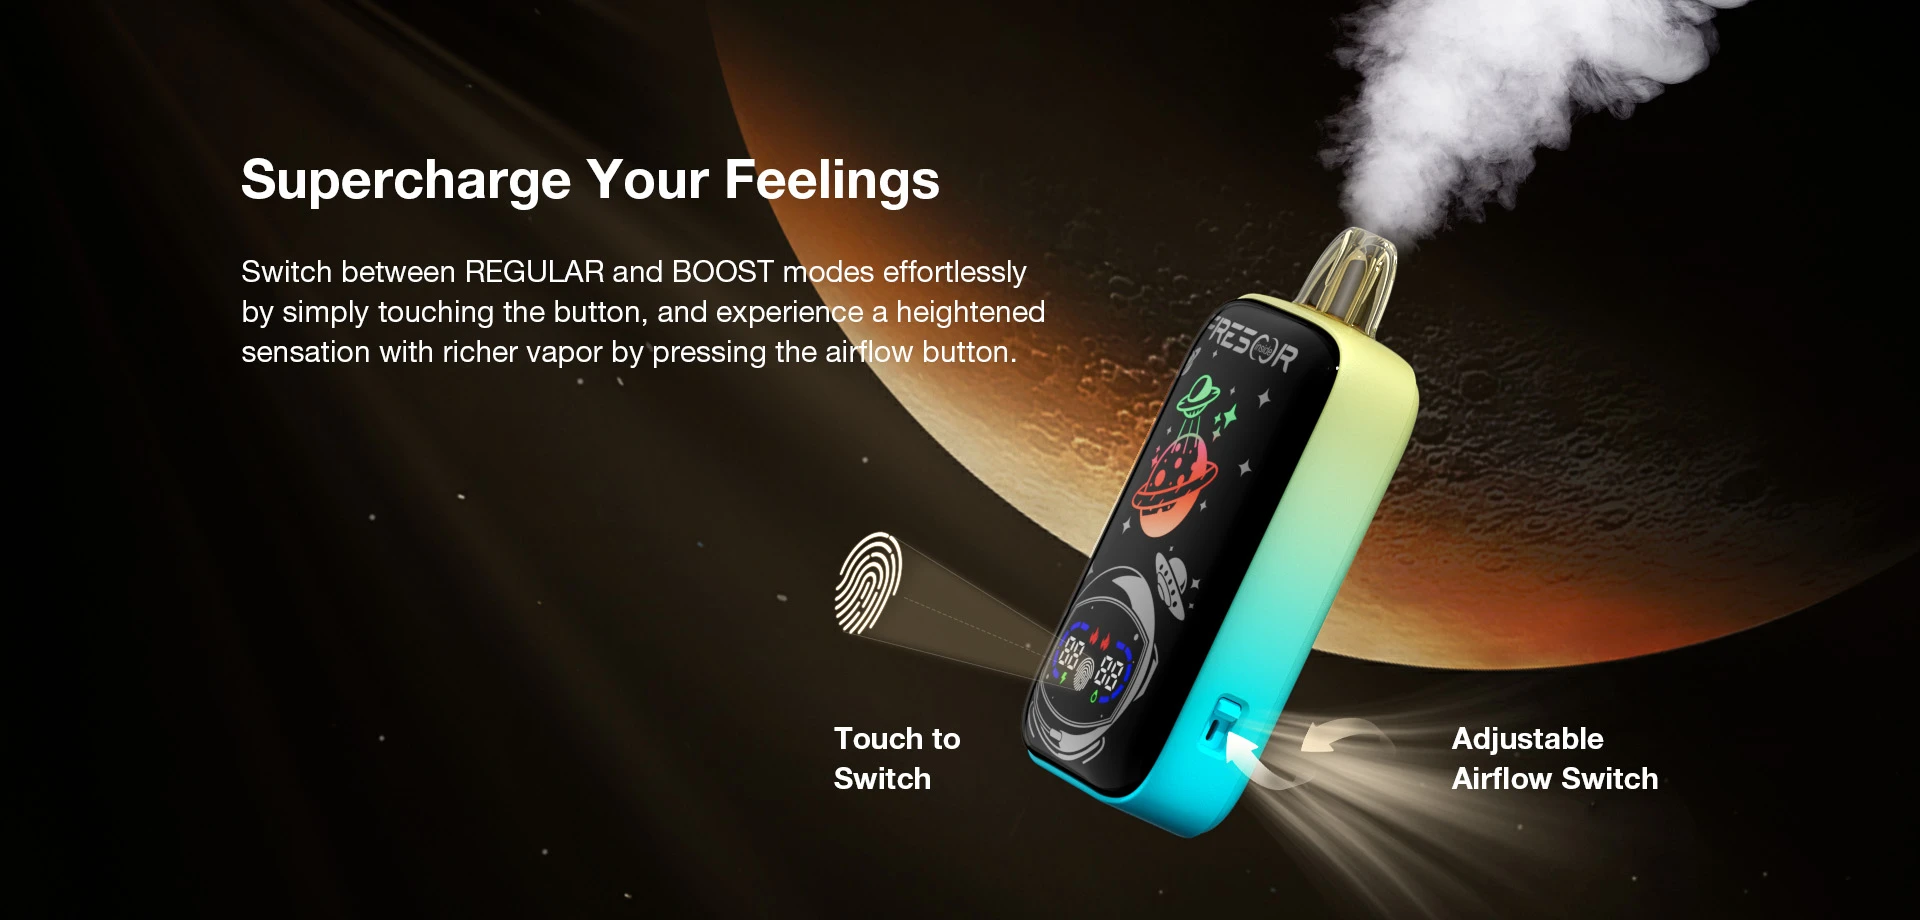 Supercharge Your Feelings Switch between REGULAR and BOOST modes effortlessly by simply touching the button, and experience a heightened sensation with richer vapor by pressing the airflow button. Touch to Switch  Adjustable Airflow Switch